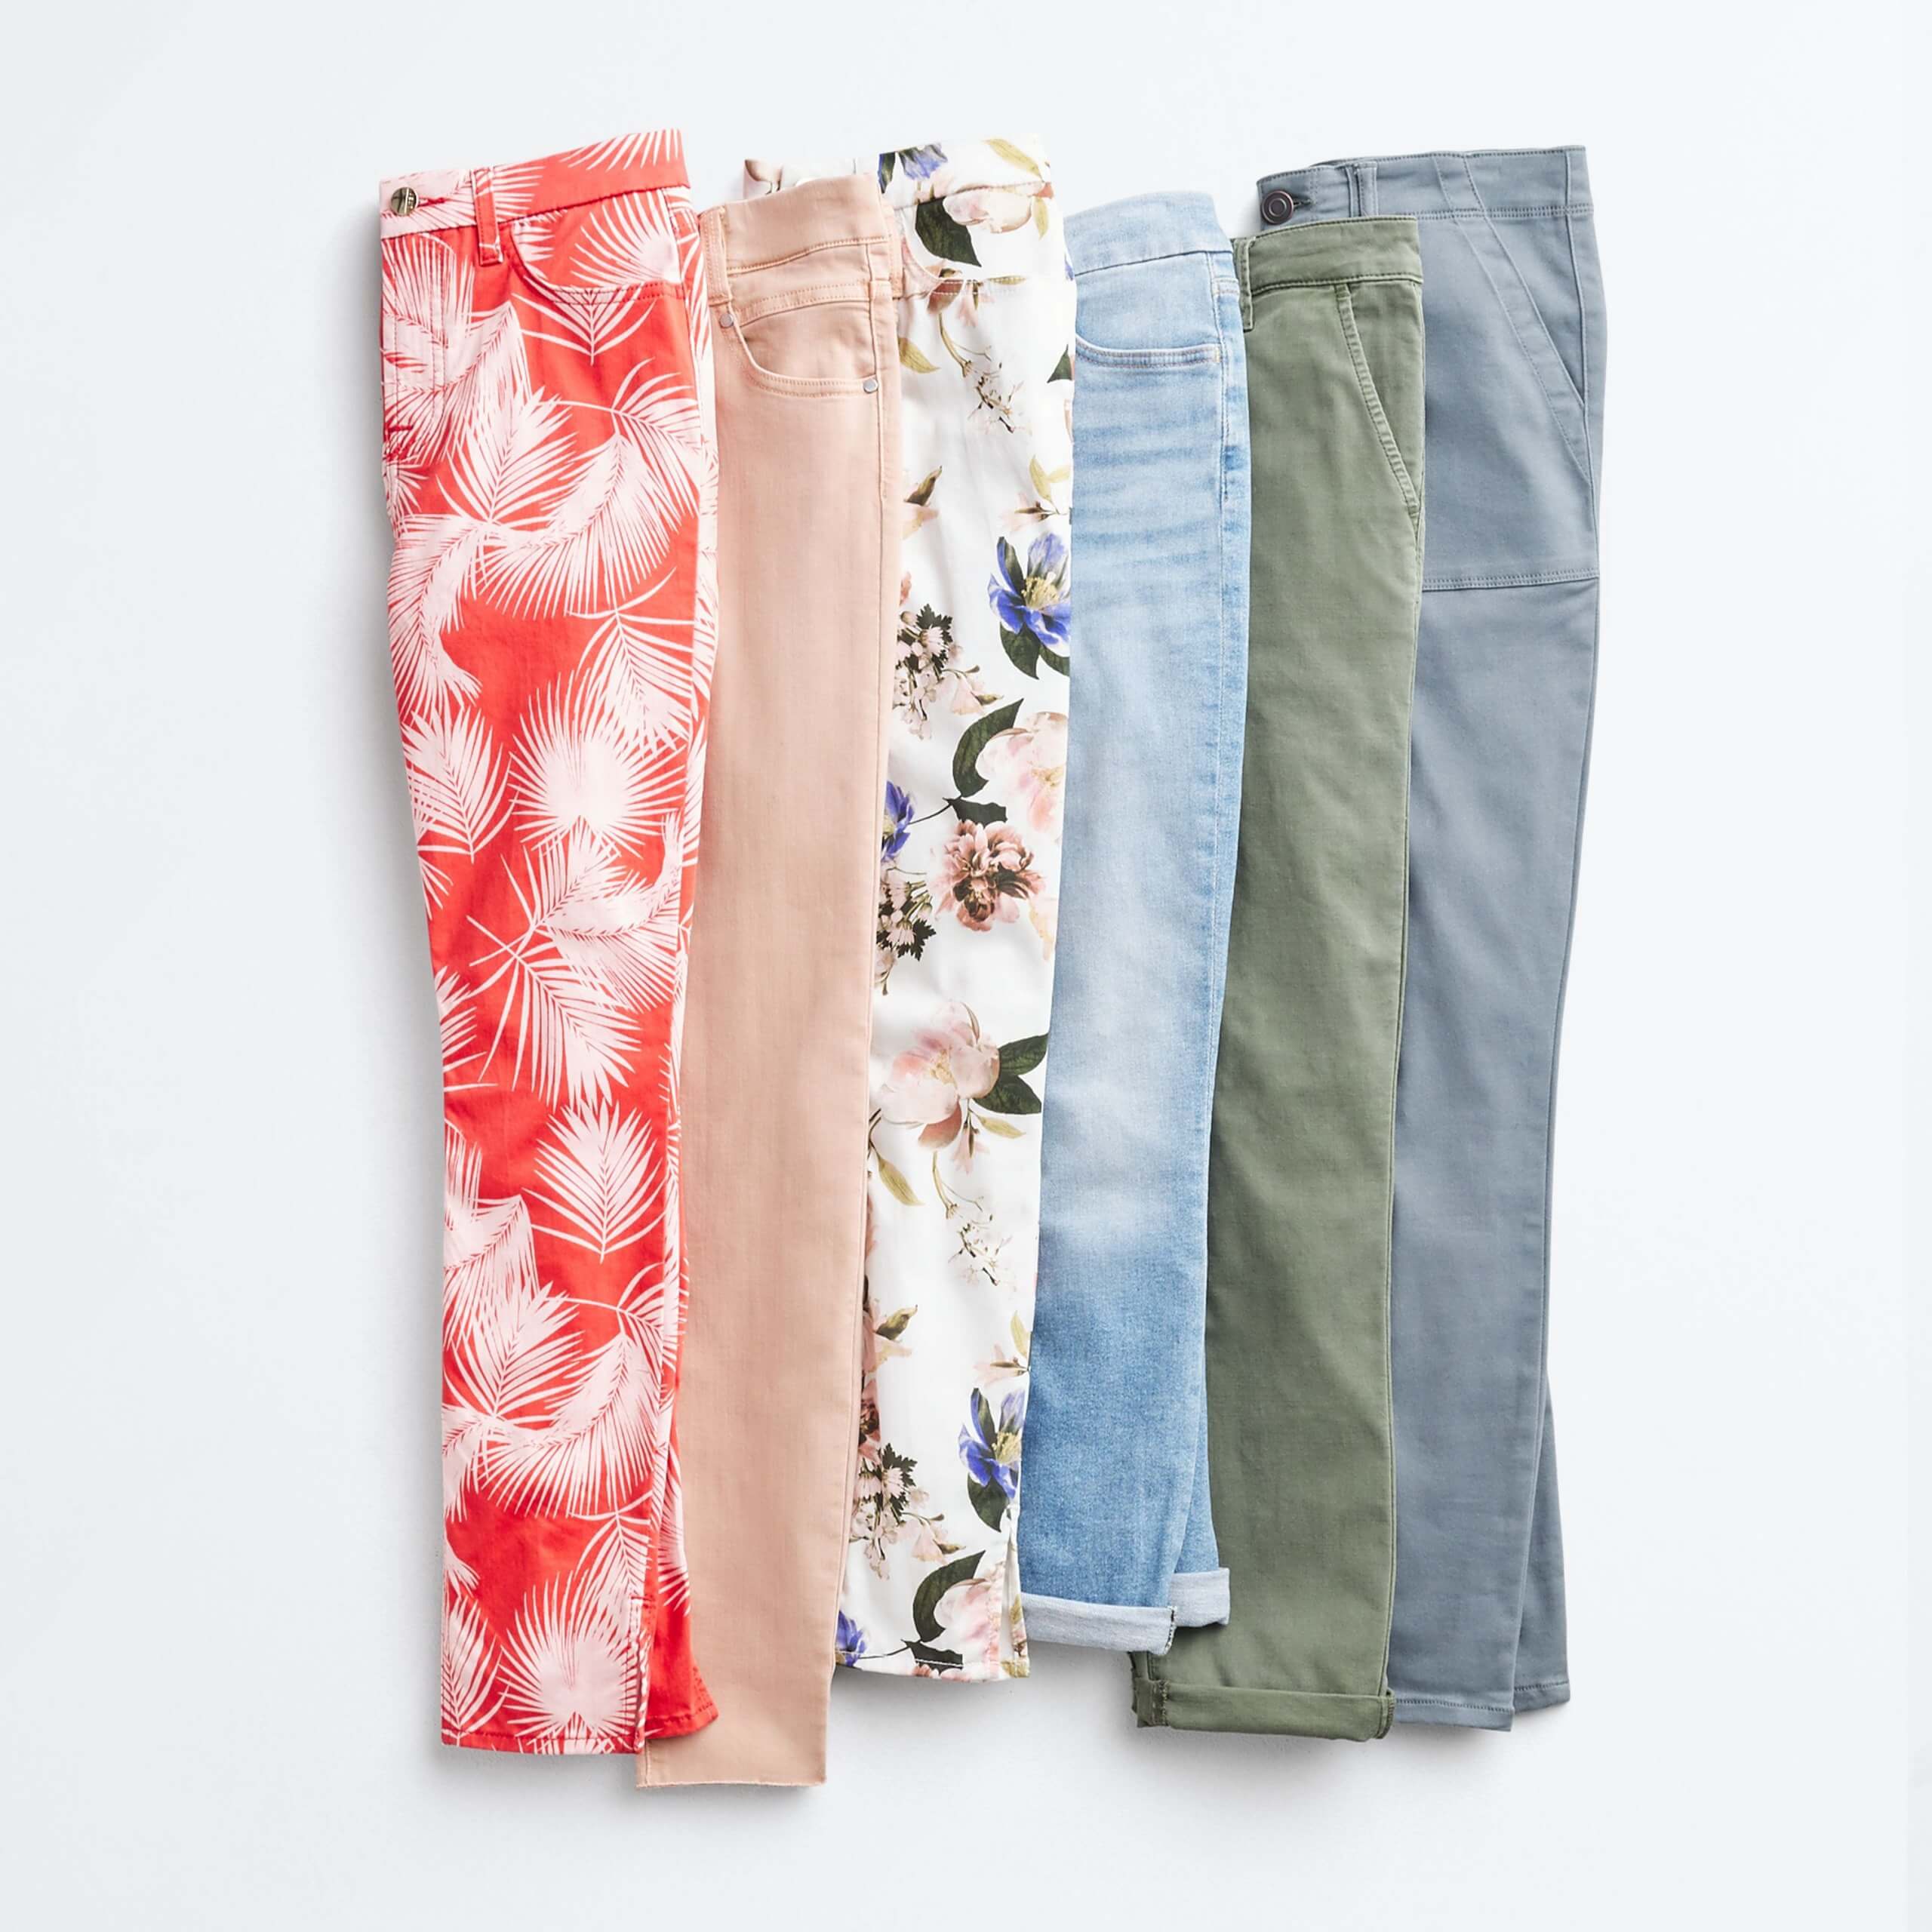 Stitch Fix Women’s outfit laydown of skinny jeans in orange tropical print, blush pink, white floral, light blue, olive green and light blue.